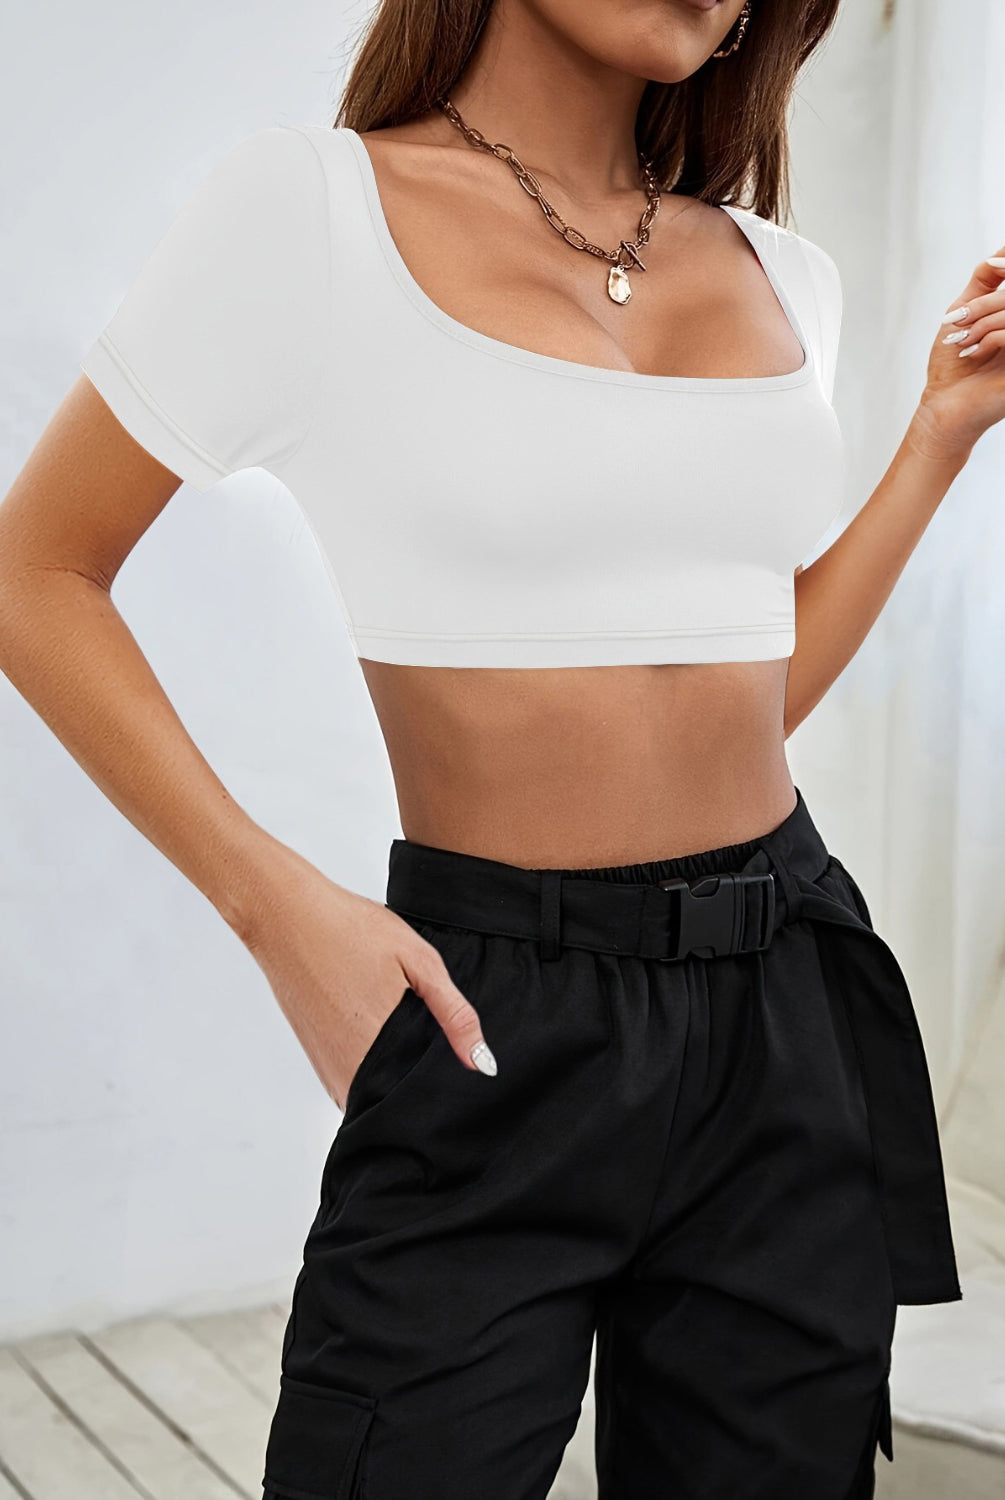 A stylish woman dons a sophisticated black crop top with a square neckline, paired seamlessly with high-waisted trousers for a sleek, urban look.